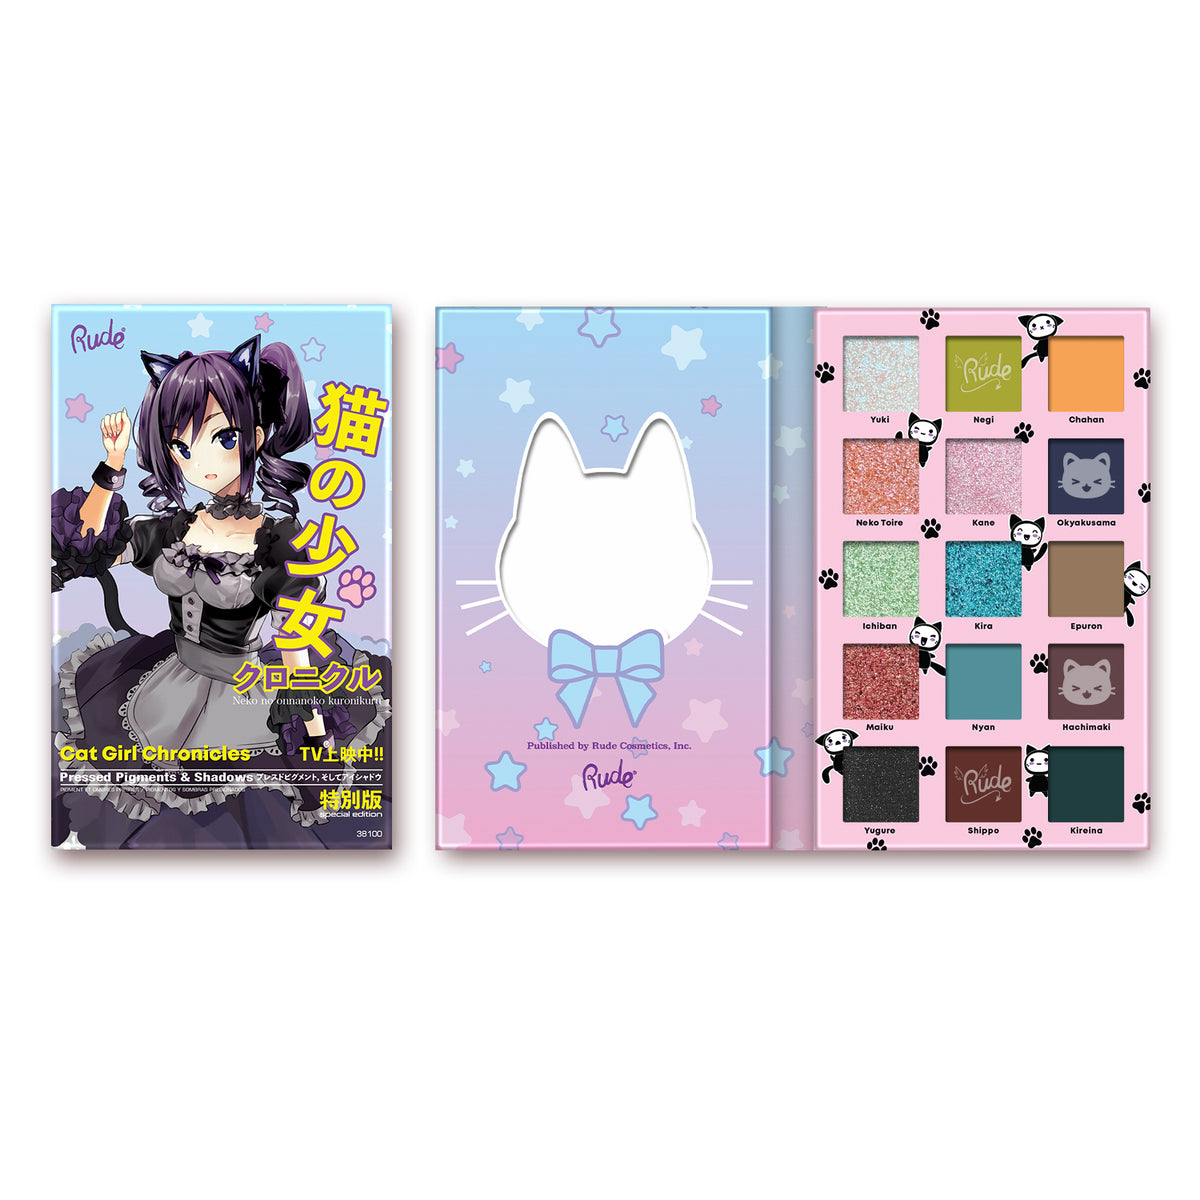 Manga Collection Pressed Pigments & Shadows Palette - Cat Girl Chronicles